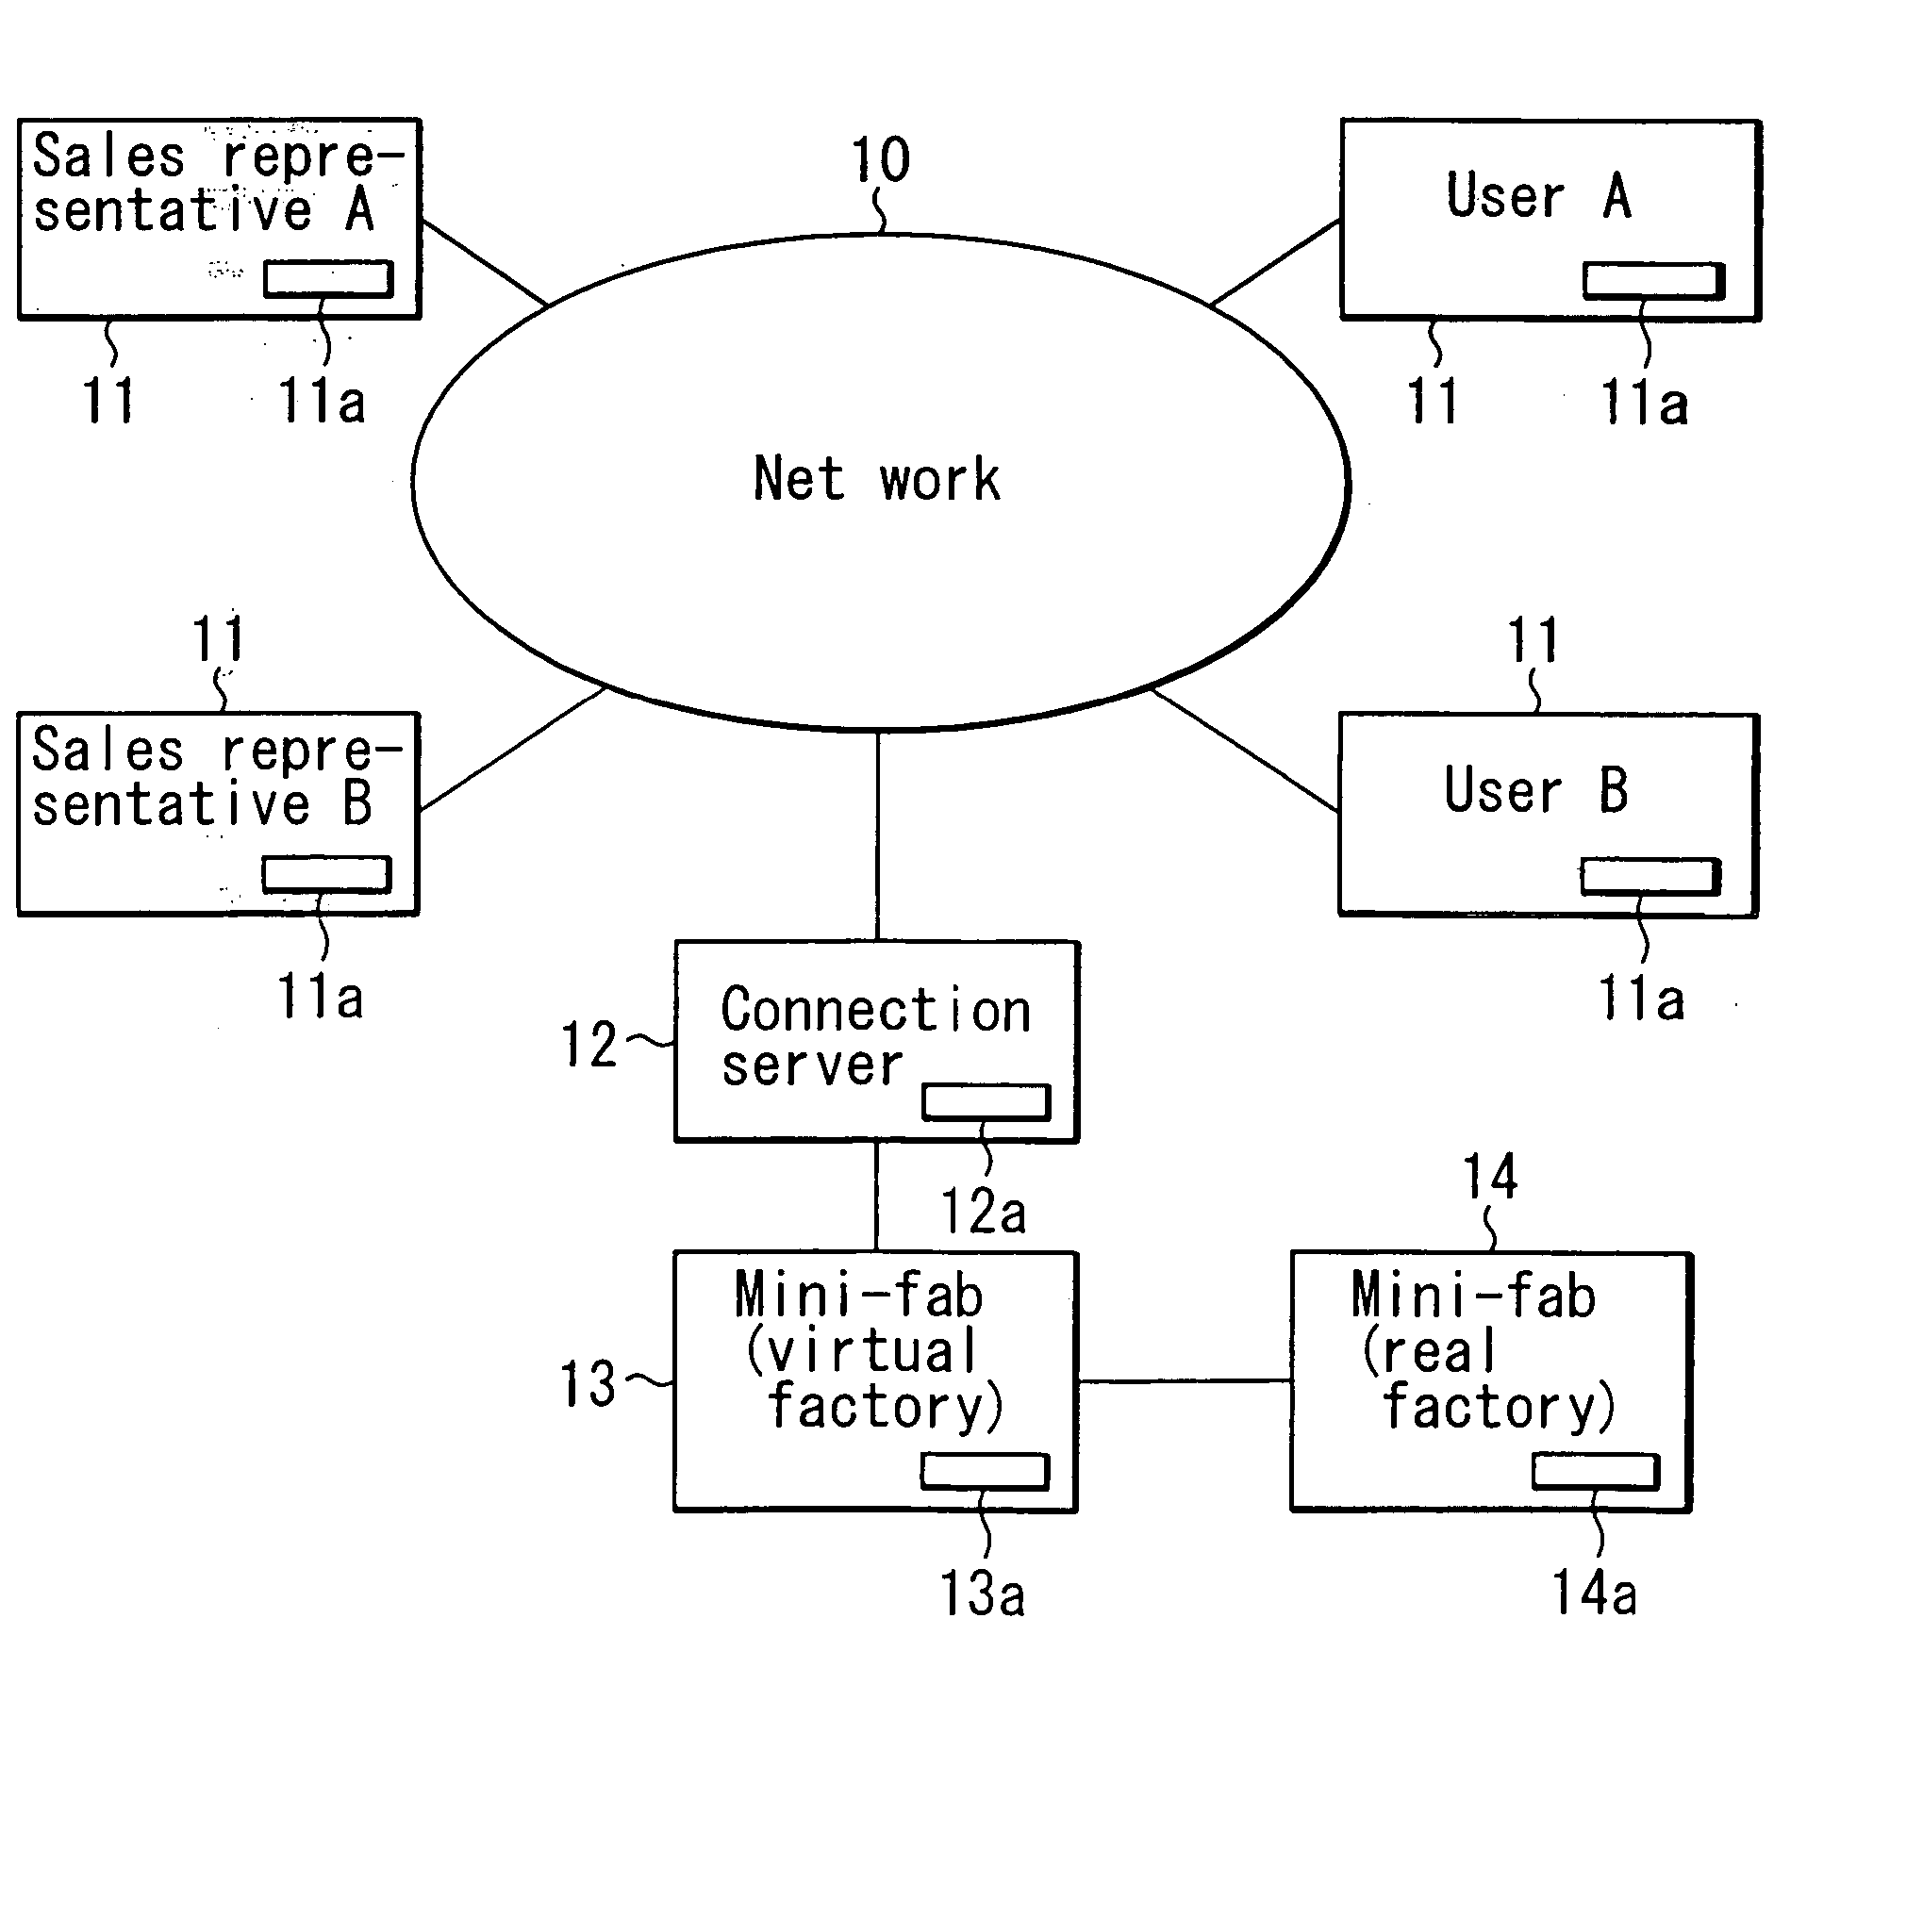 Electronic commerce method for semiconductor products, electronic commerce thereof, production system, production method, production equipment design system, production equipment design method, and production equipment manufacturing method